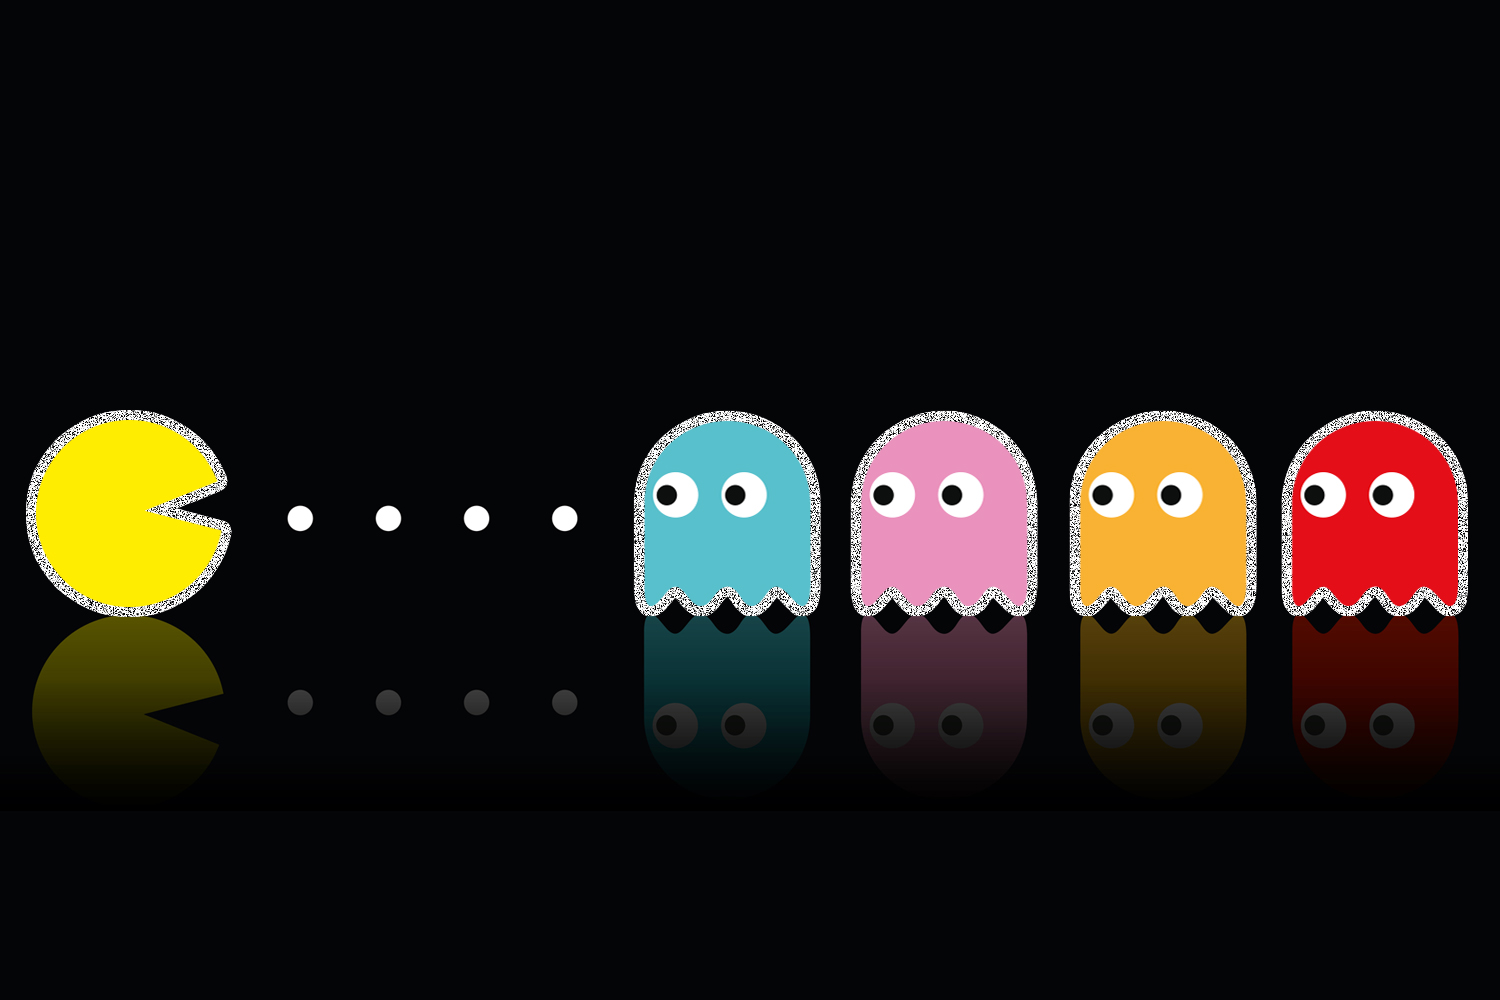 Image of Pacman eating dots